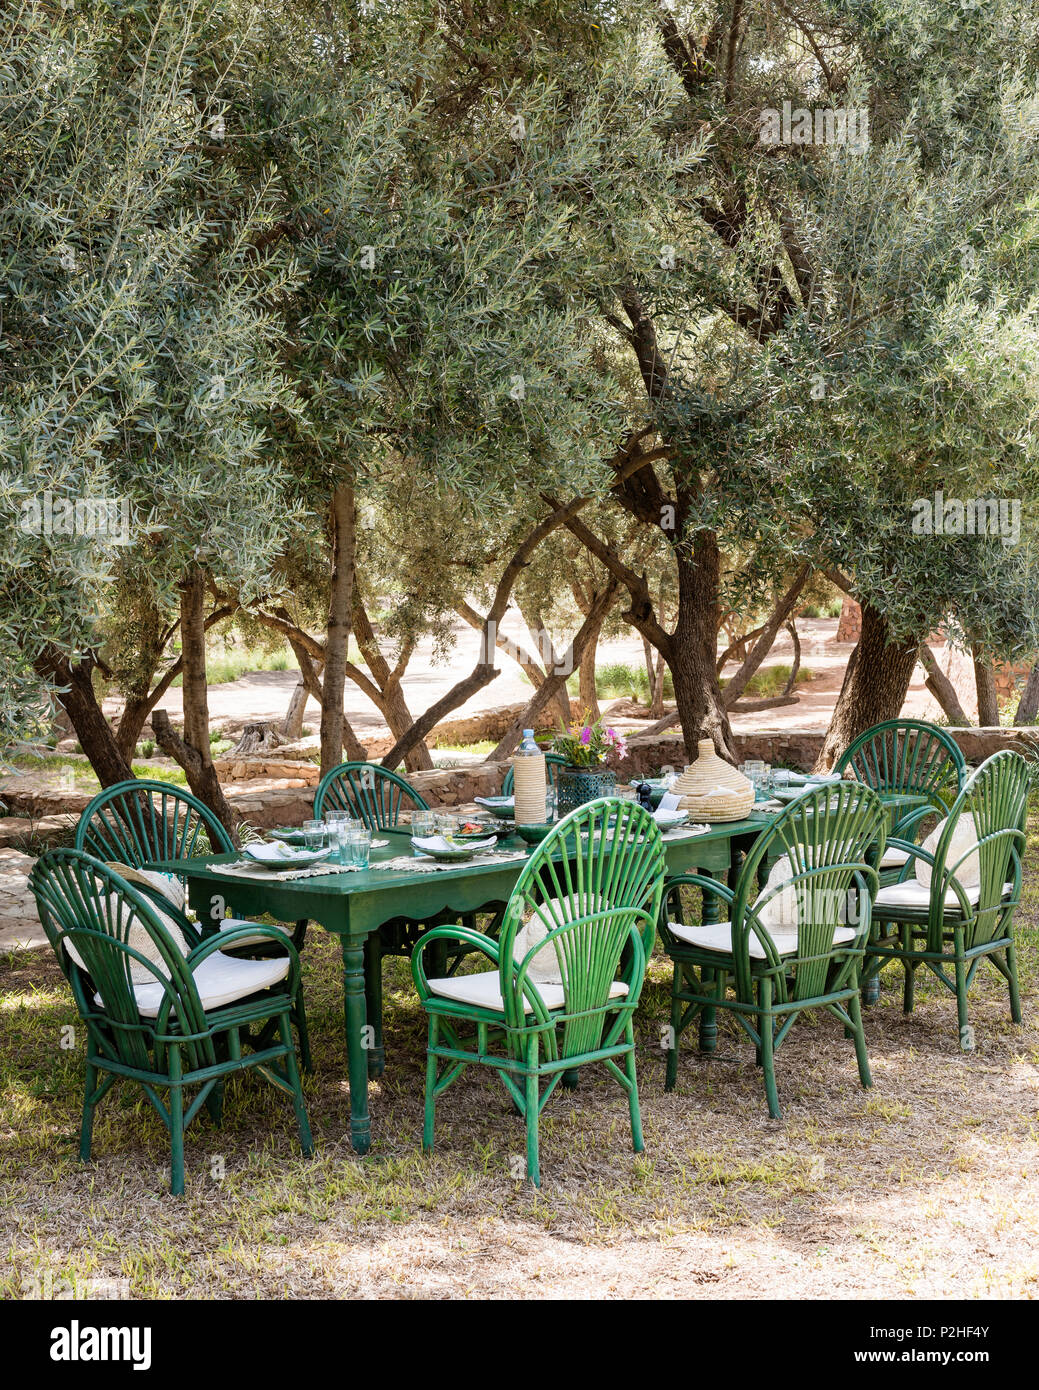 laid green table and chairs in garden with olive grove Stock Photo